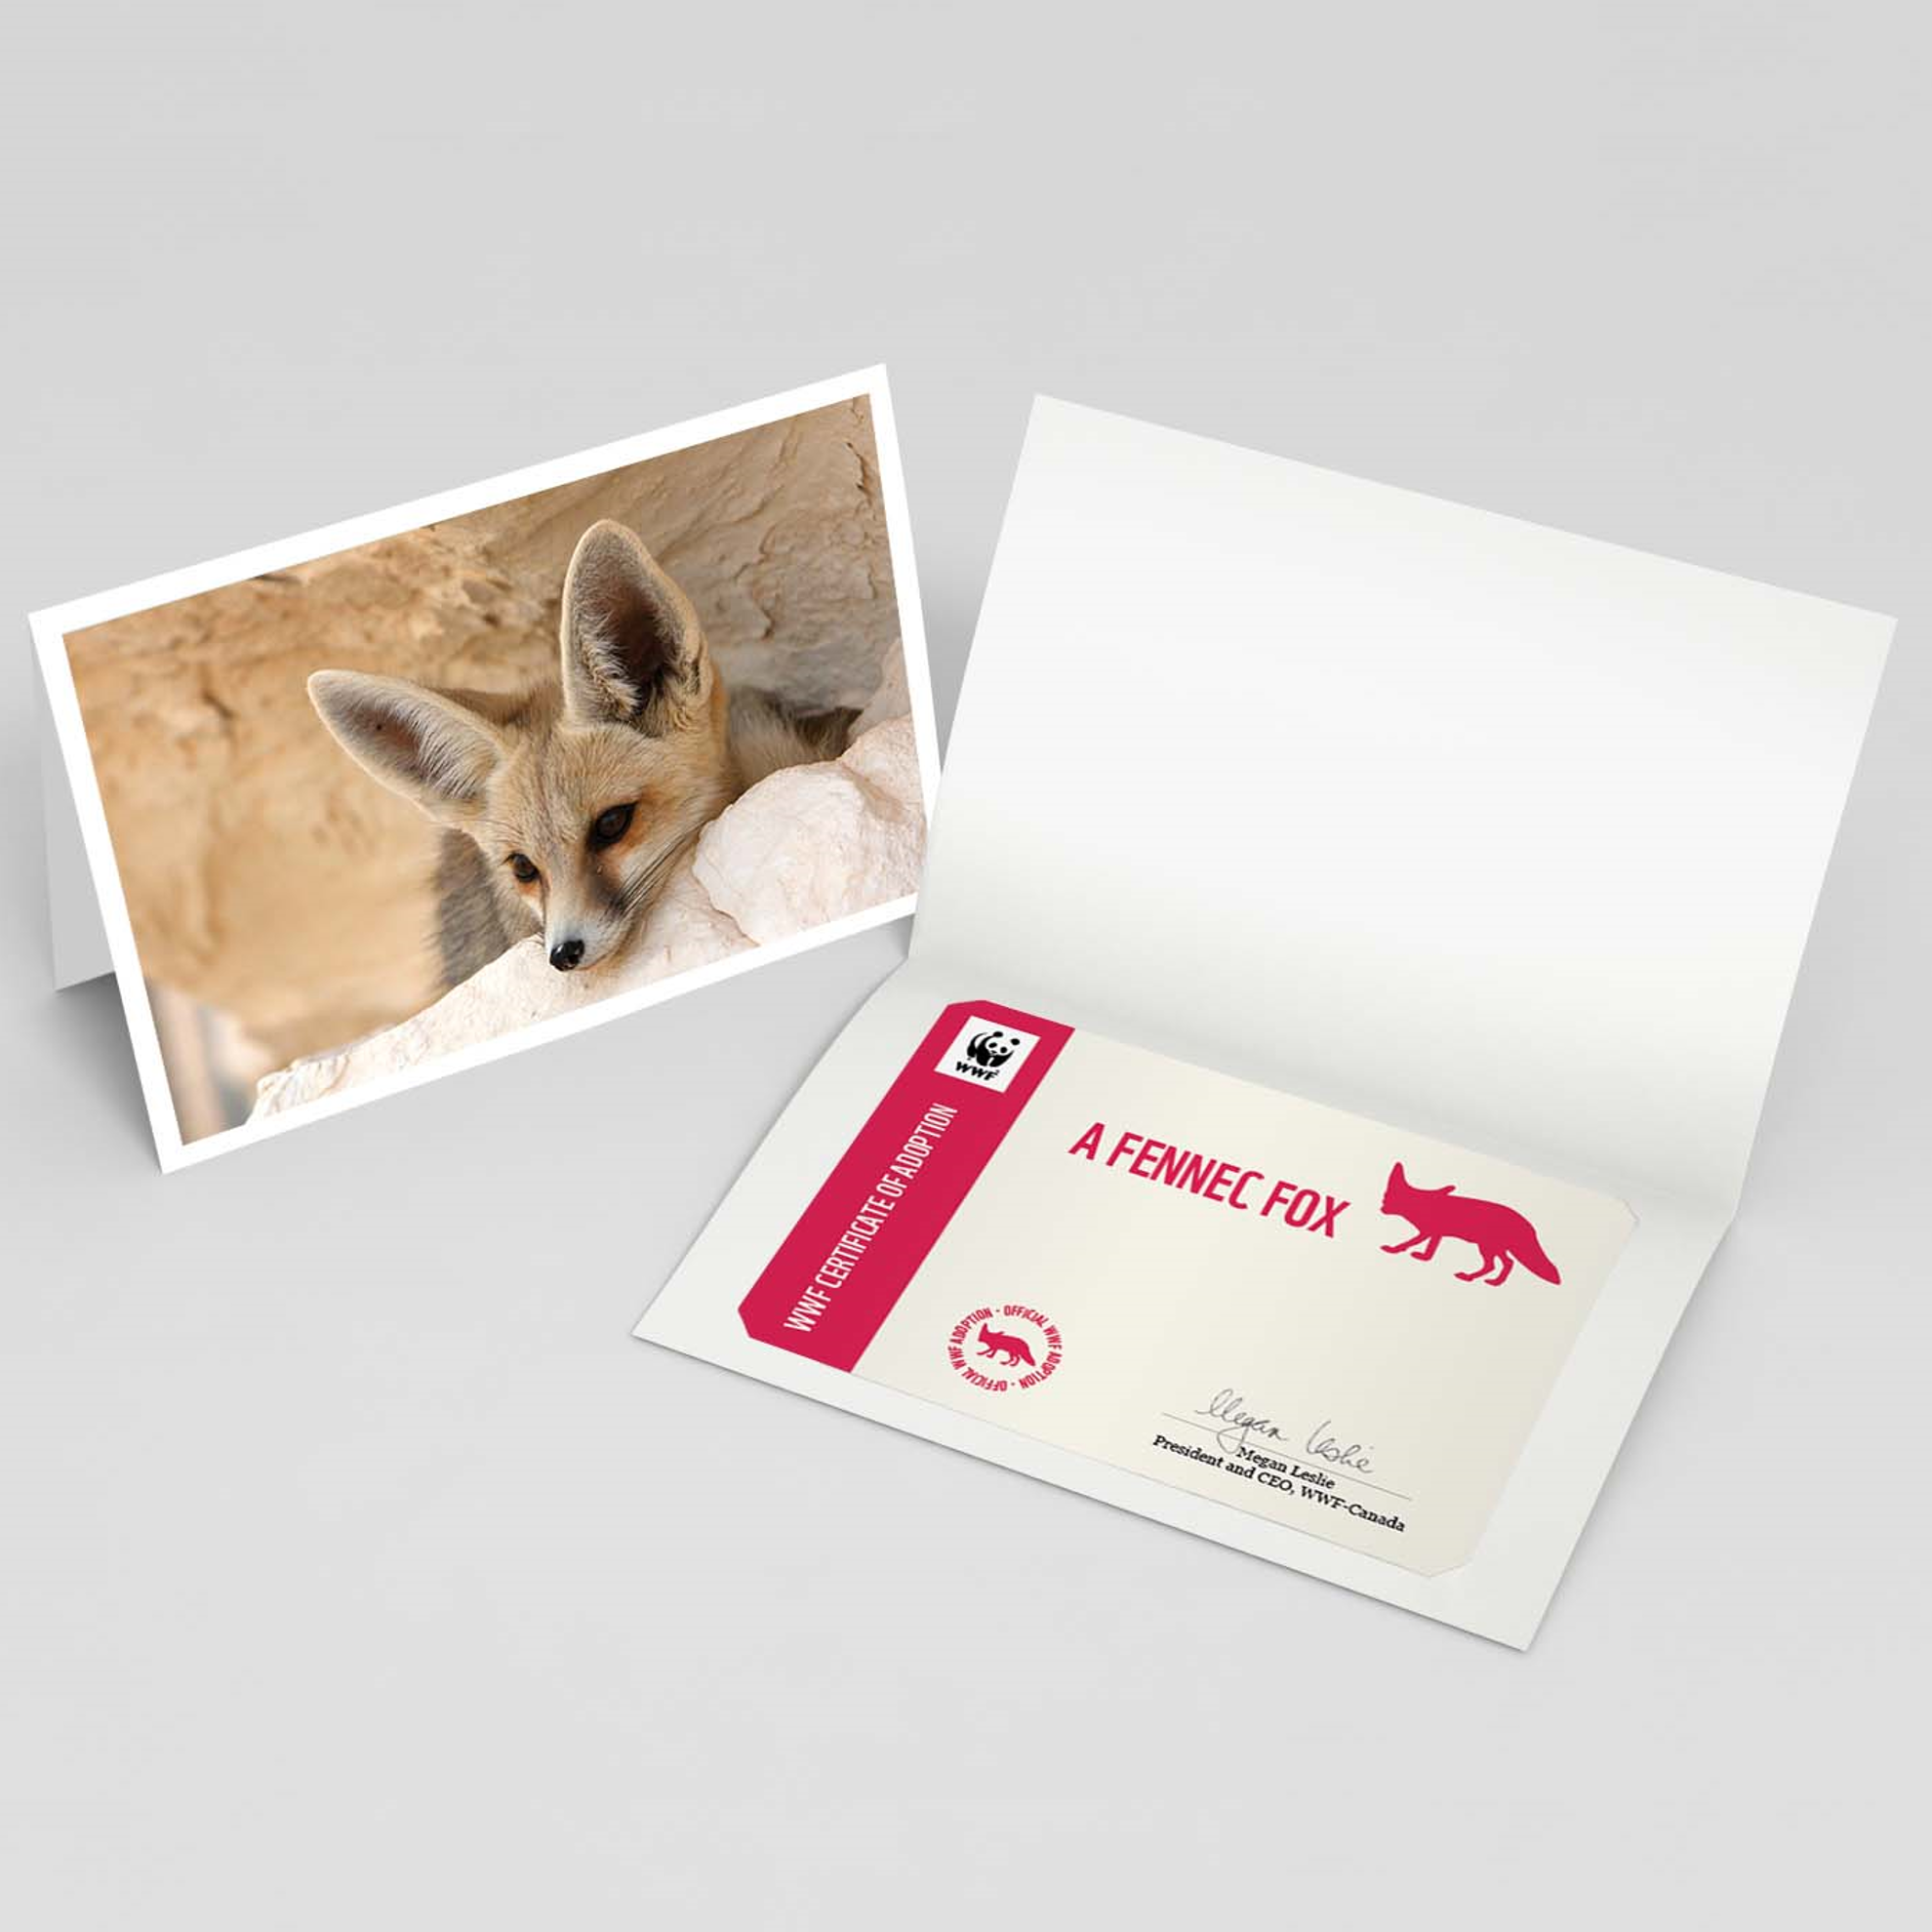 Pictured on the left is the fennec fox adoption card cover featuring a picture of a fennec fox peaking out of a burrow. Beside it is the inside of the card containing a personalized fennec fox adoption certificate.